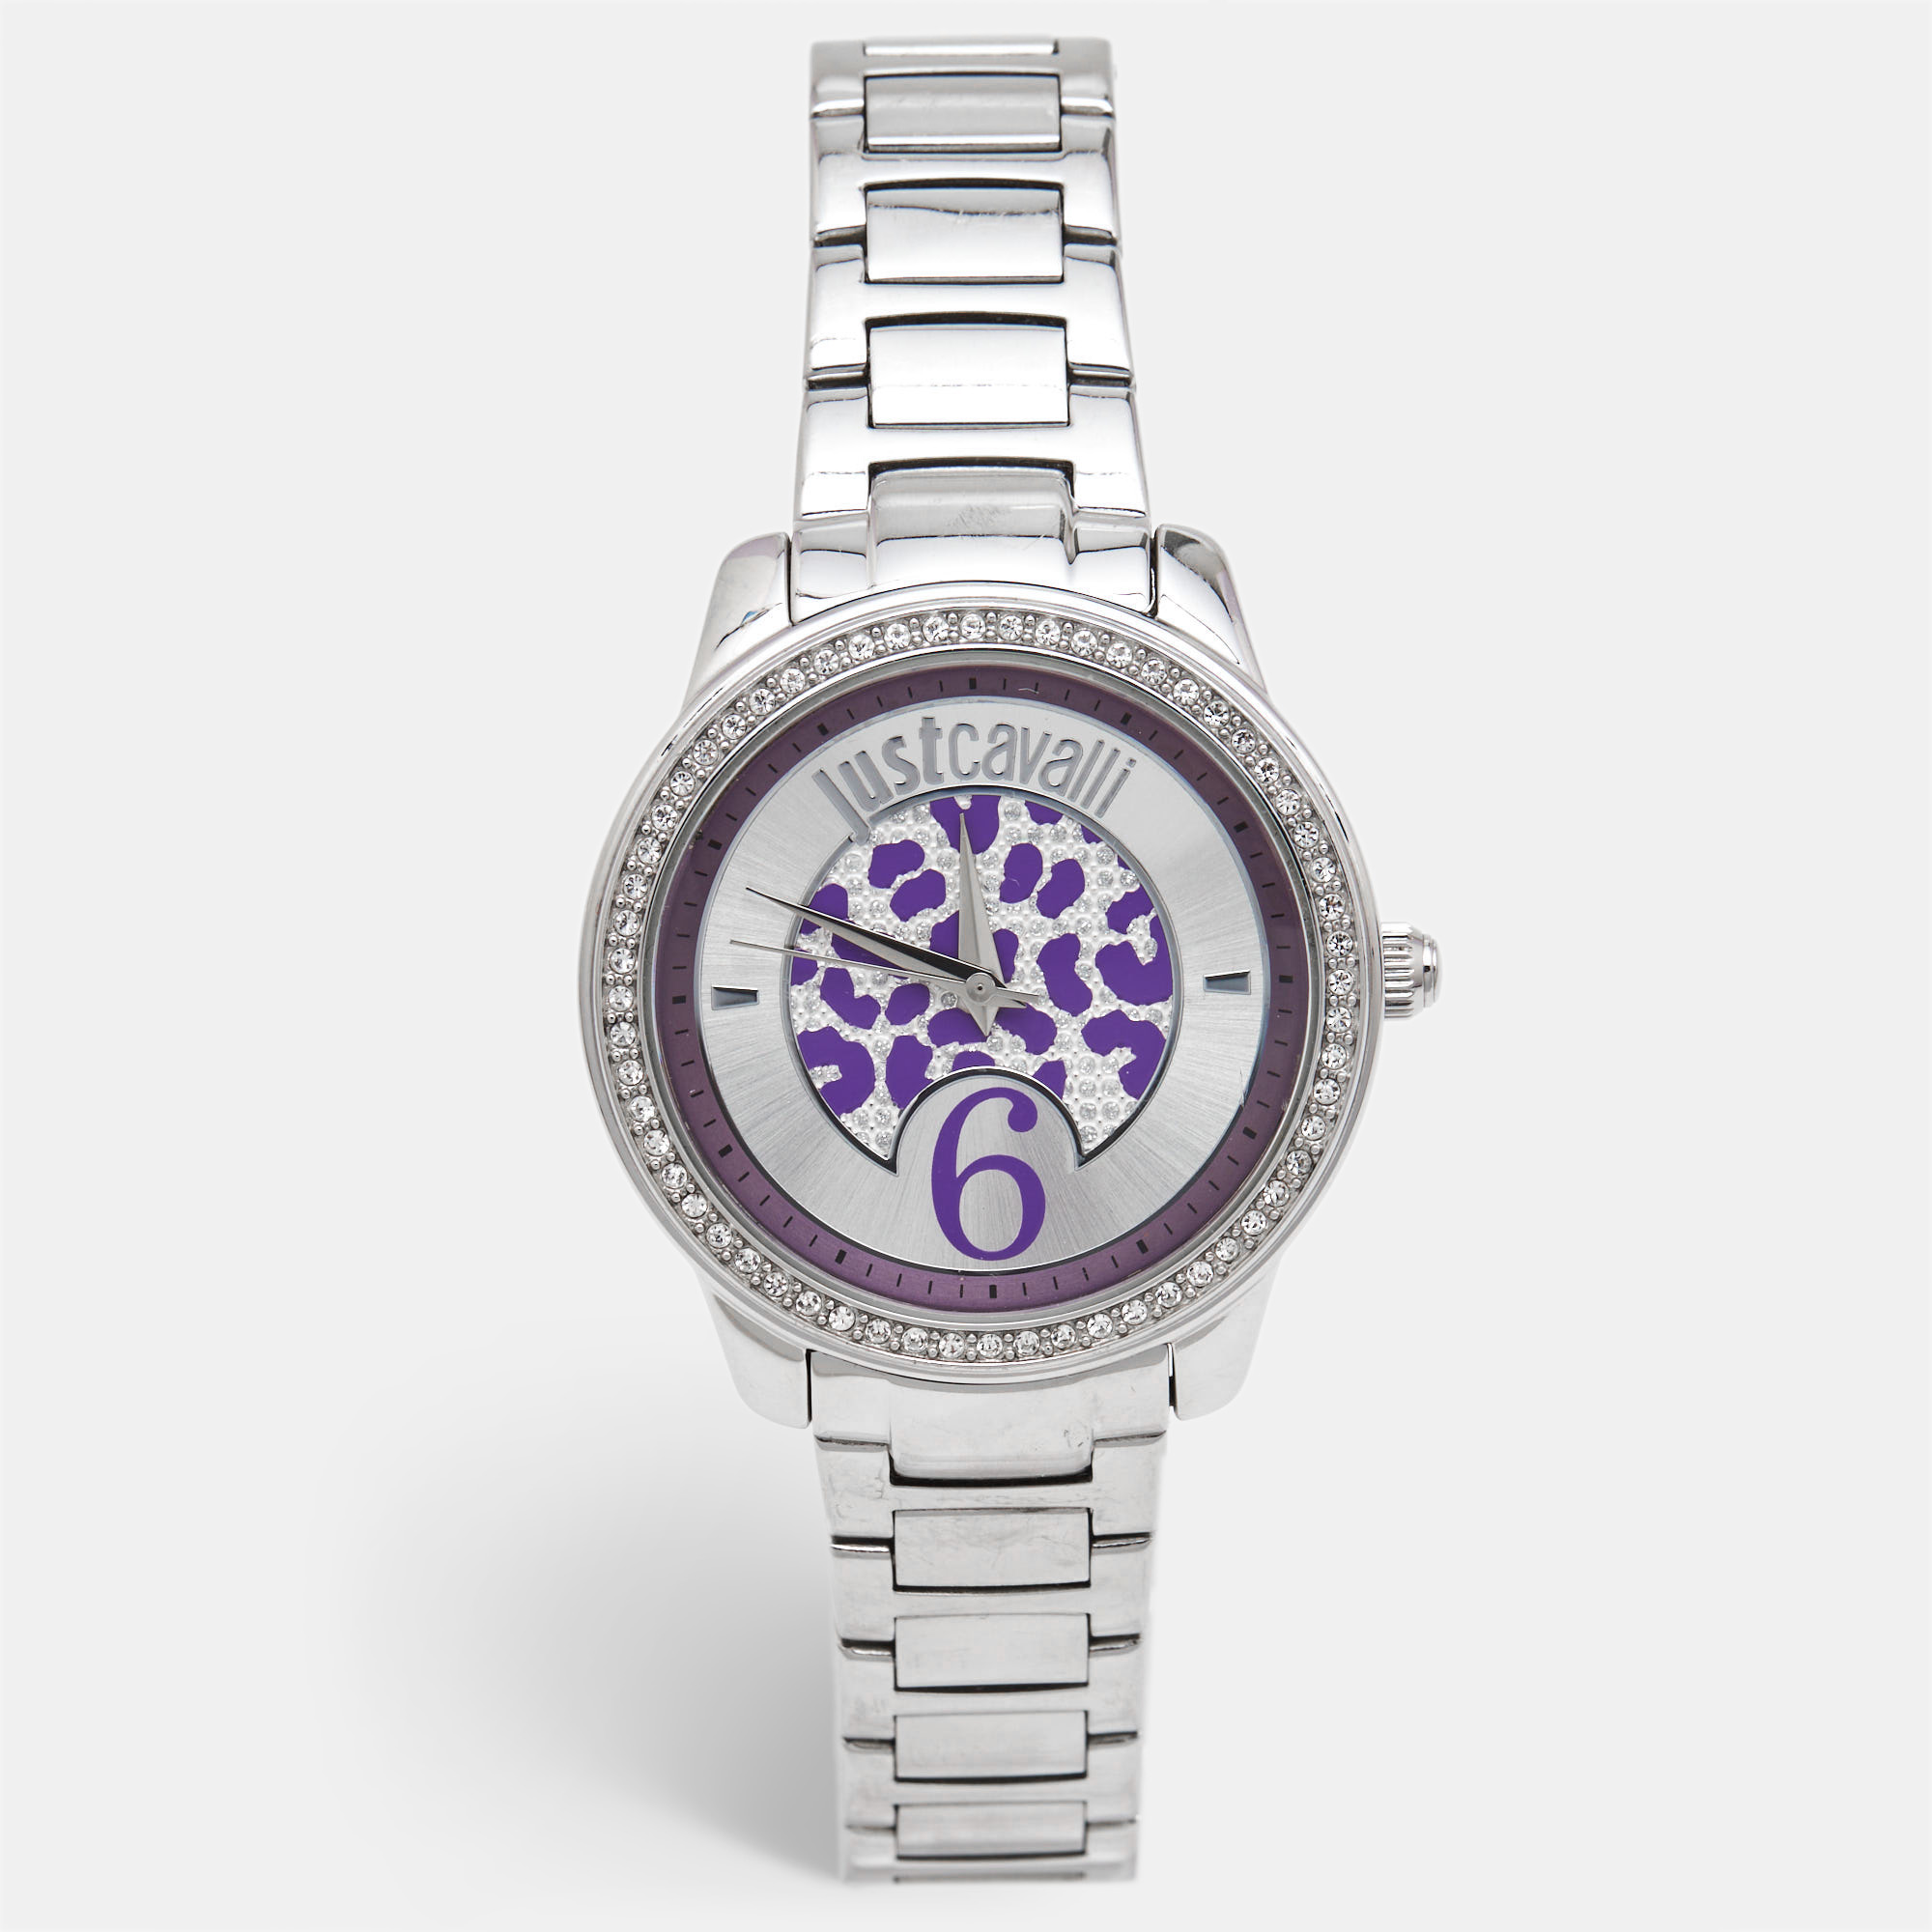 Pre-owned Just Cavalli Purple Silver Crystal Embellished Stainless Steel R7253196501 Women's Wristwatch 40 Mm